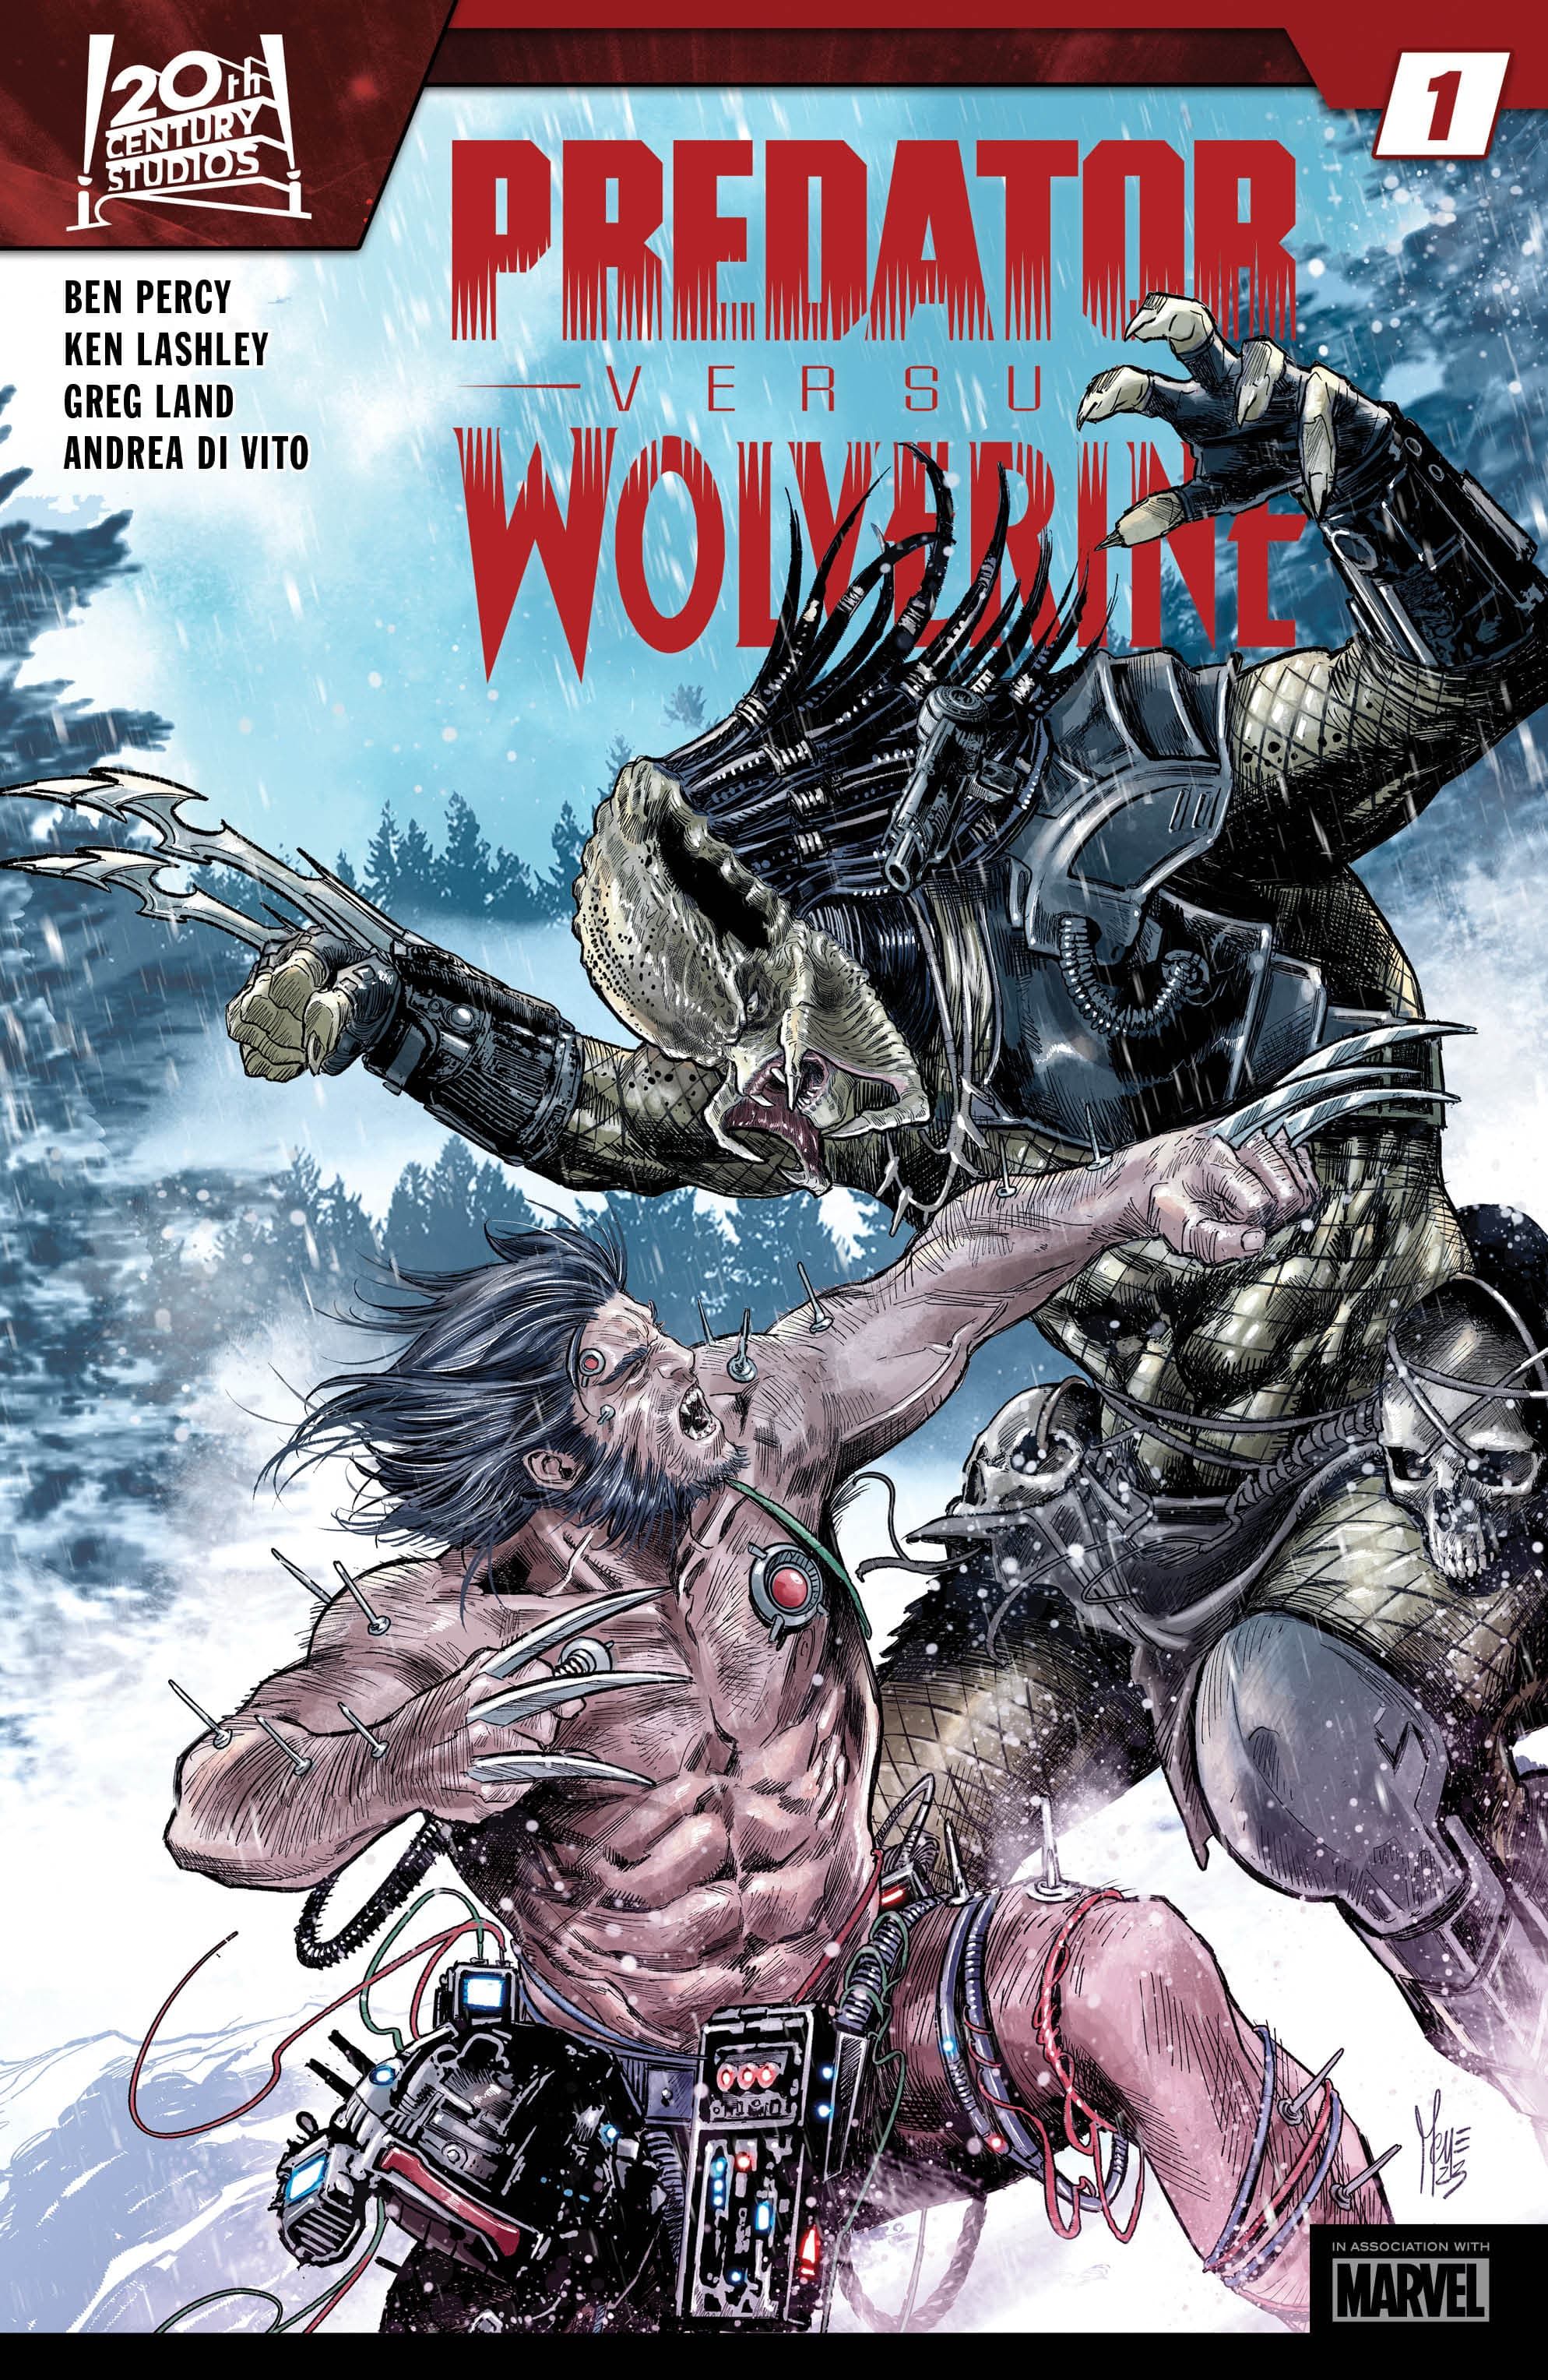 Wolverine and Predator fight in the snow